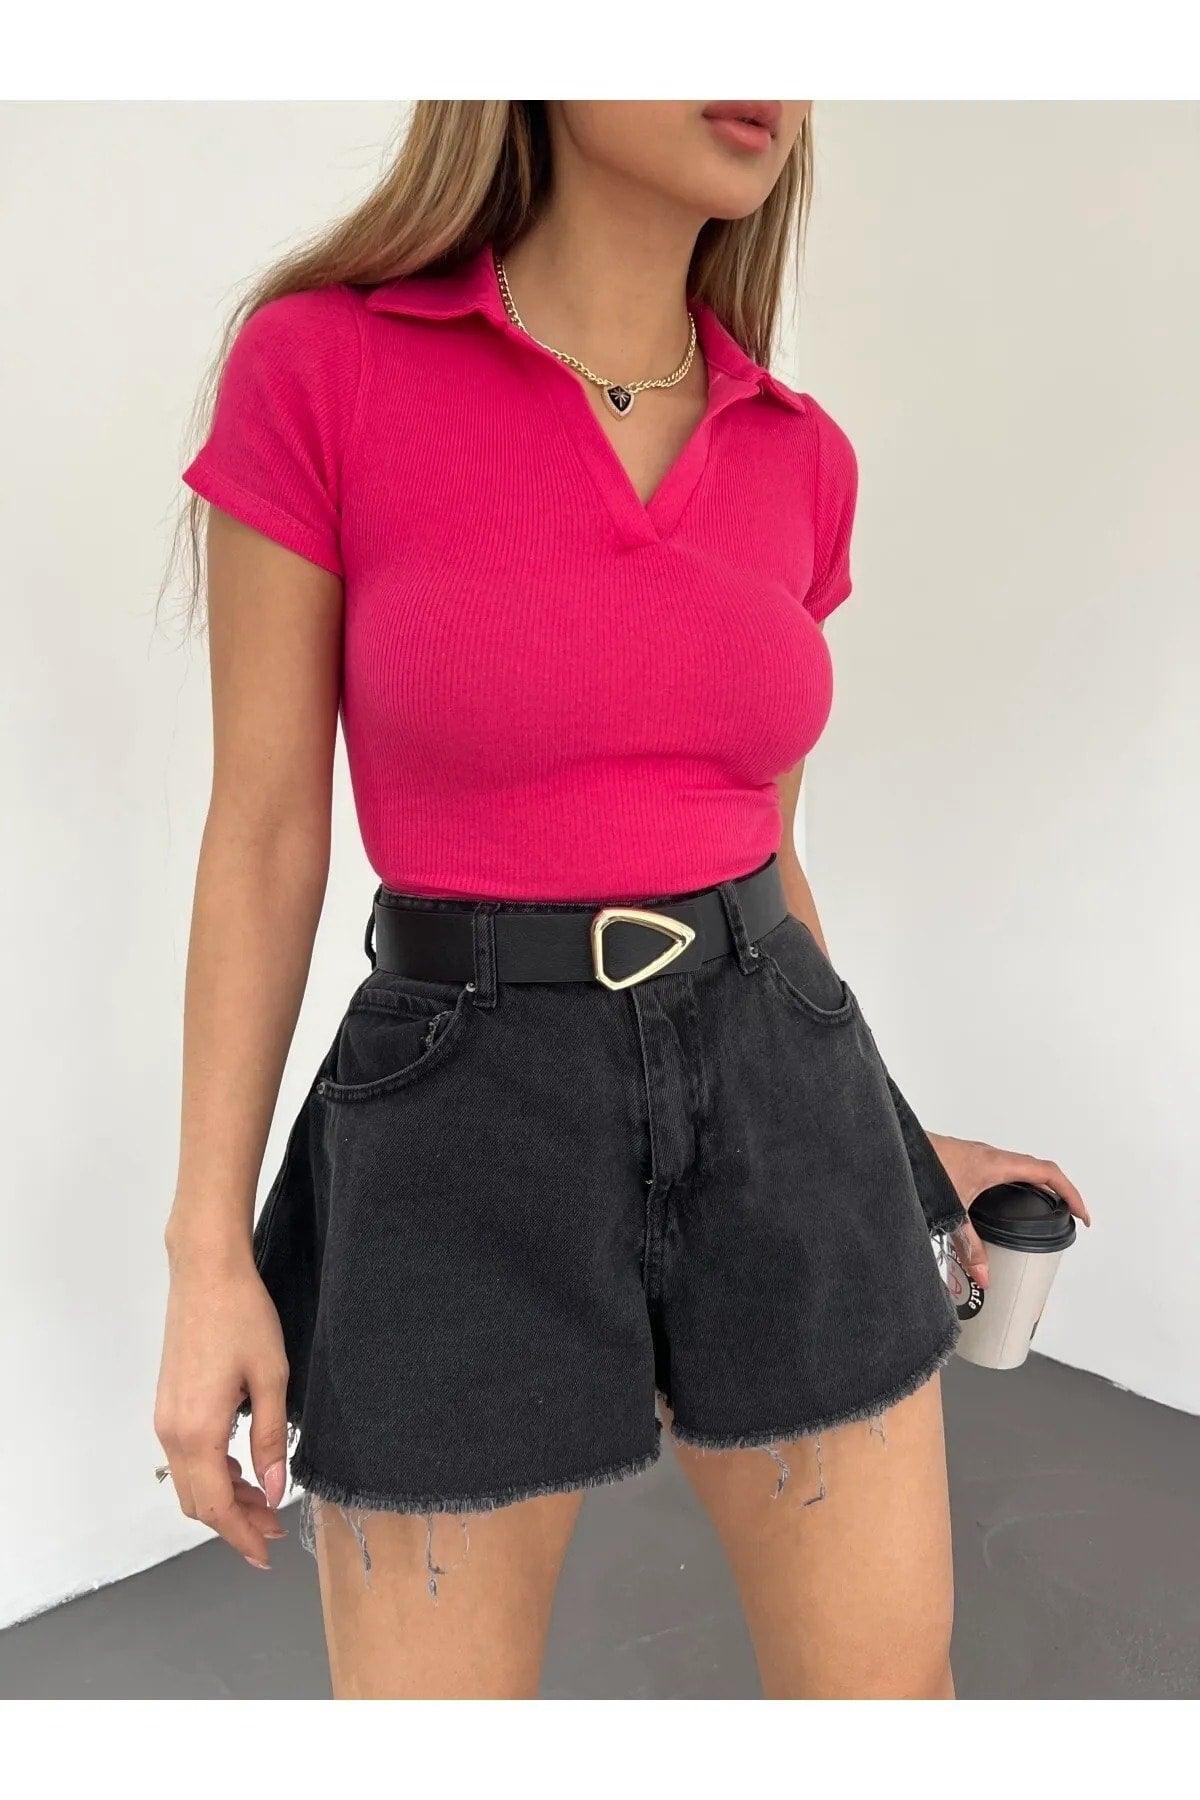 Fitted/Fitted Candy Pink Polo Neck Short Sleeve Camisole Crop Blouse - Swordslife